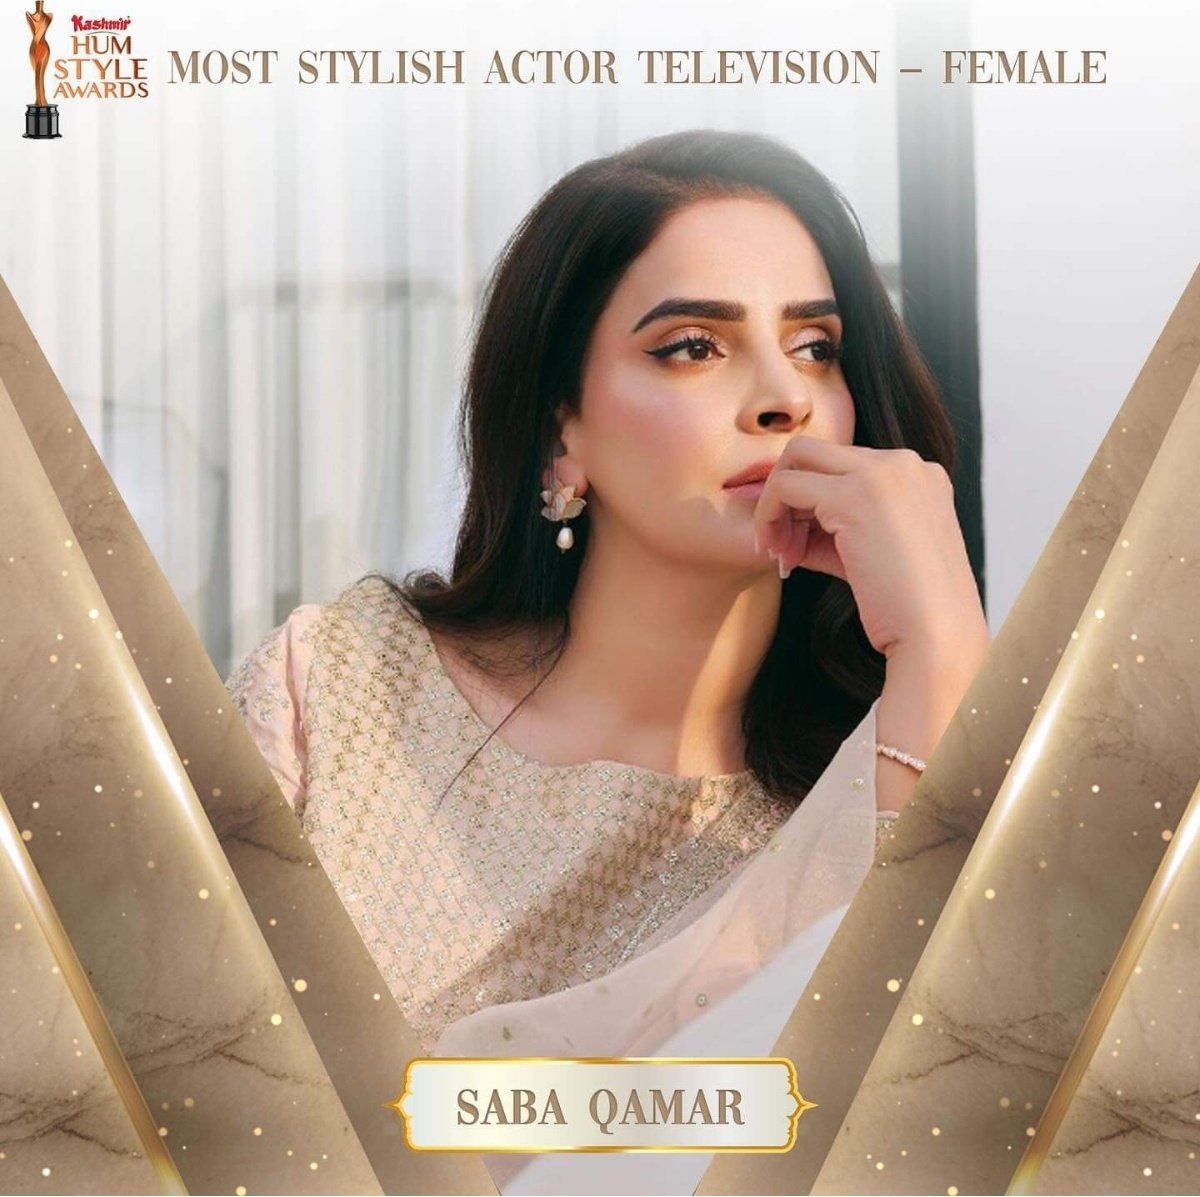 Please vote for any one of them in tv actress category, both are very stylish and my absolute faves💖
Here is the link:
humstyleawards.com/vote-2024/

#ayezakhan #jaanejahan #humraaz #sabaqamar #pagalkhana #humstyleawards